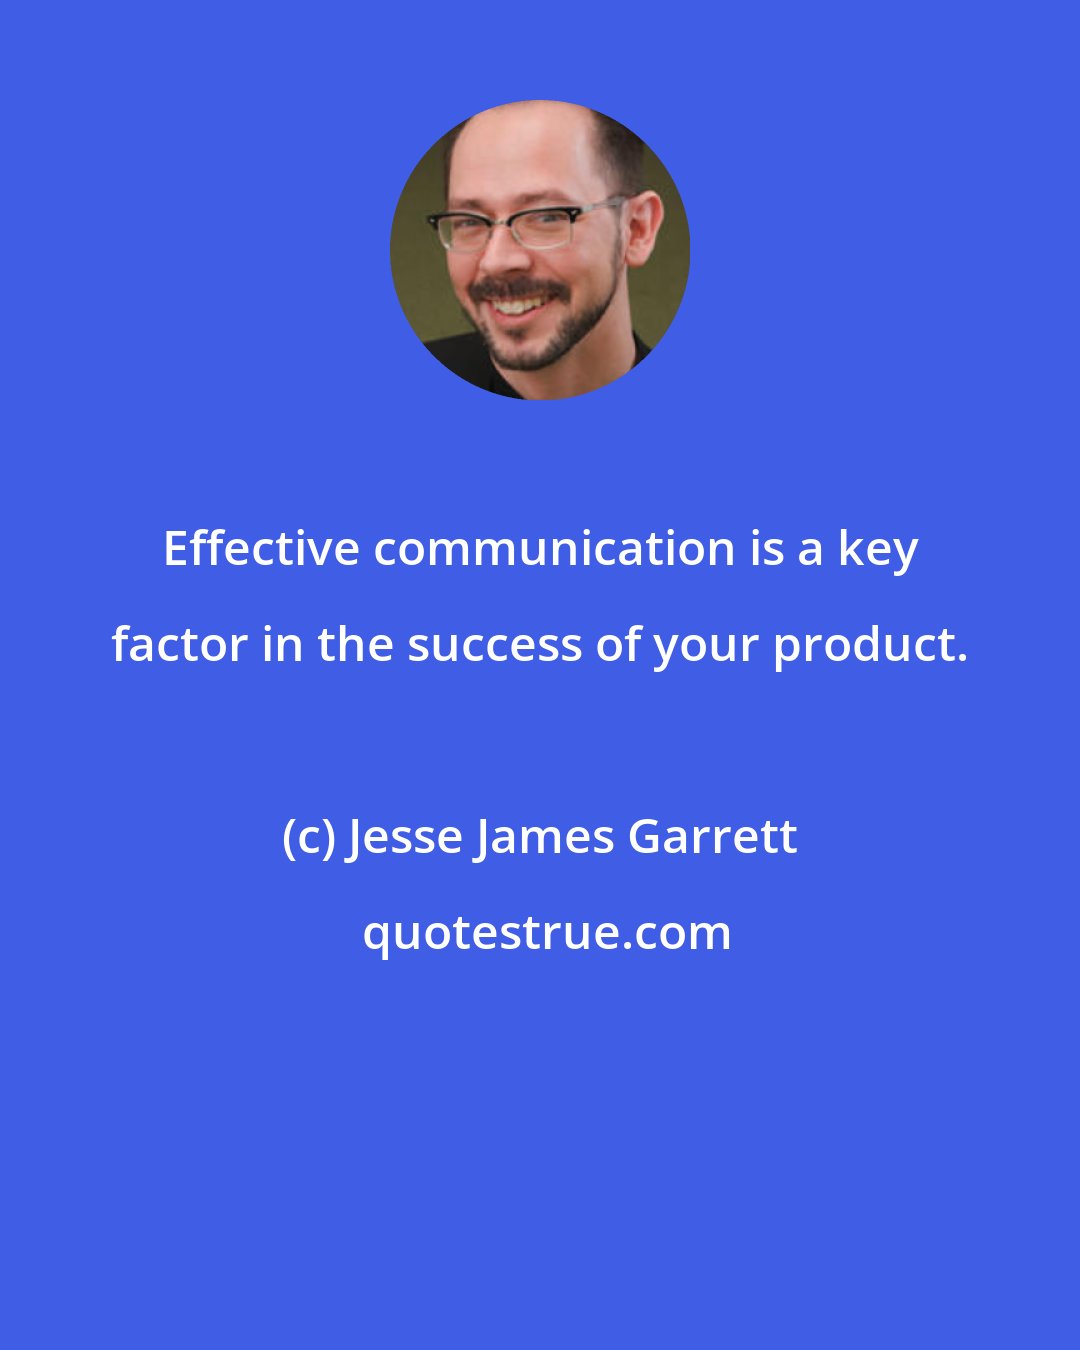 Jesse James Garrett: Effective communication is a key factor in the success of your product.